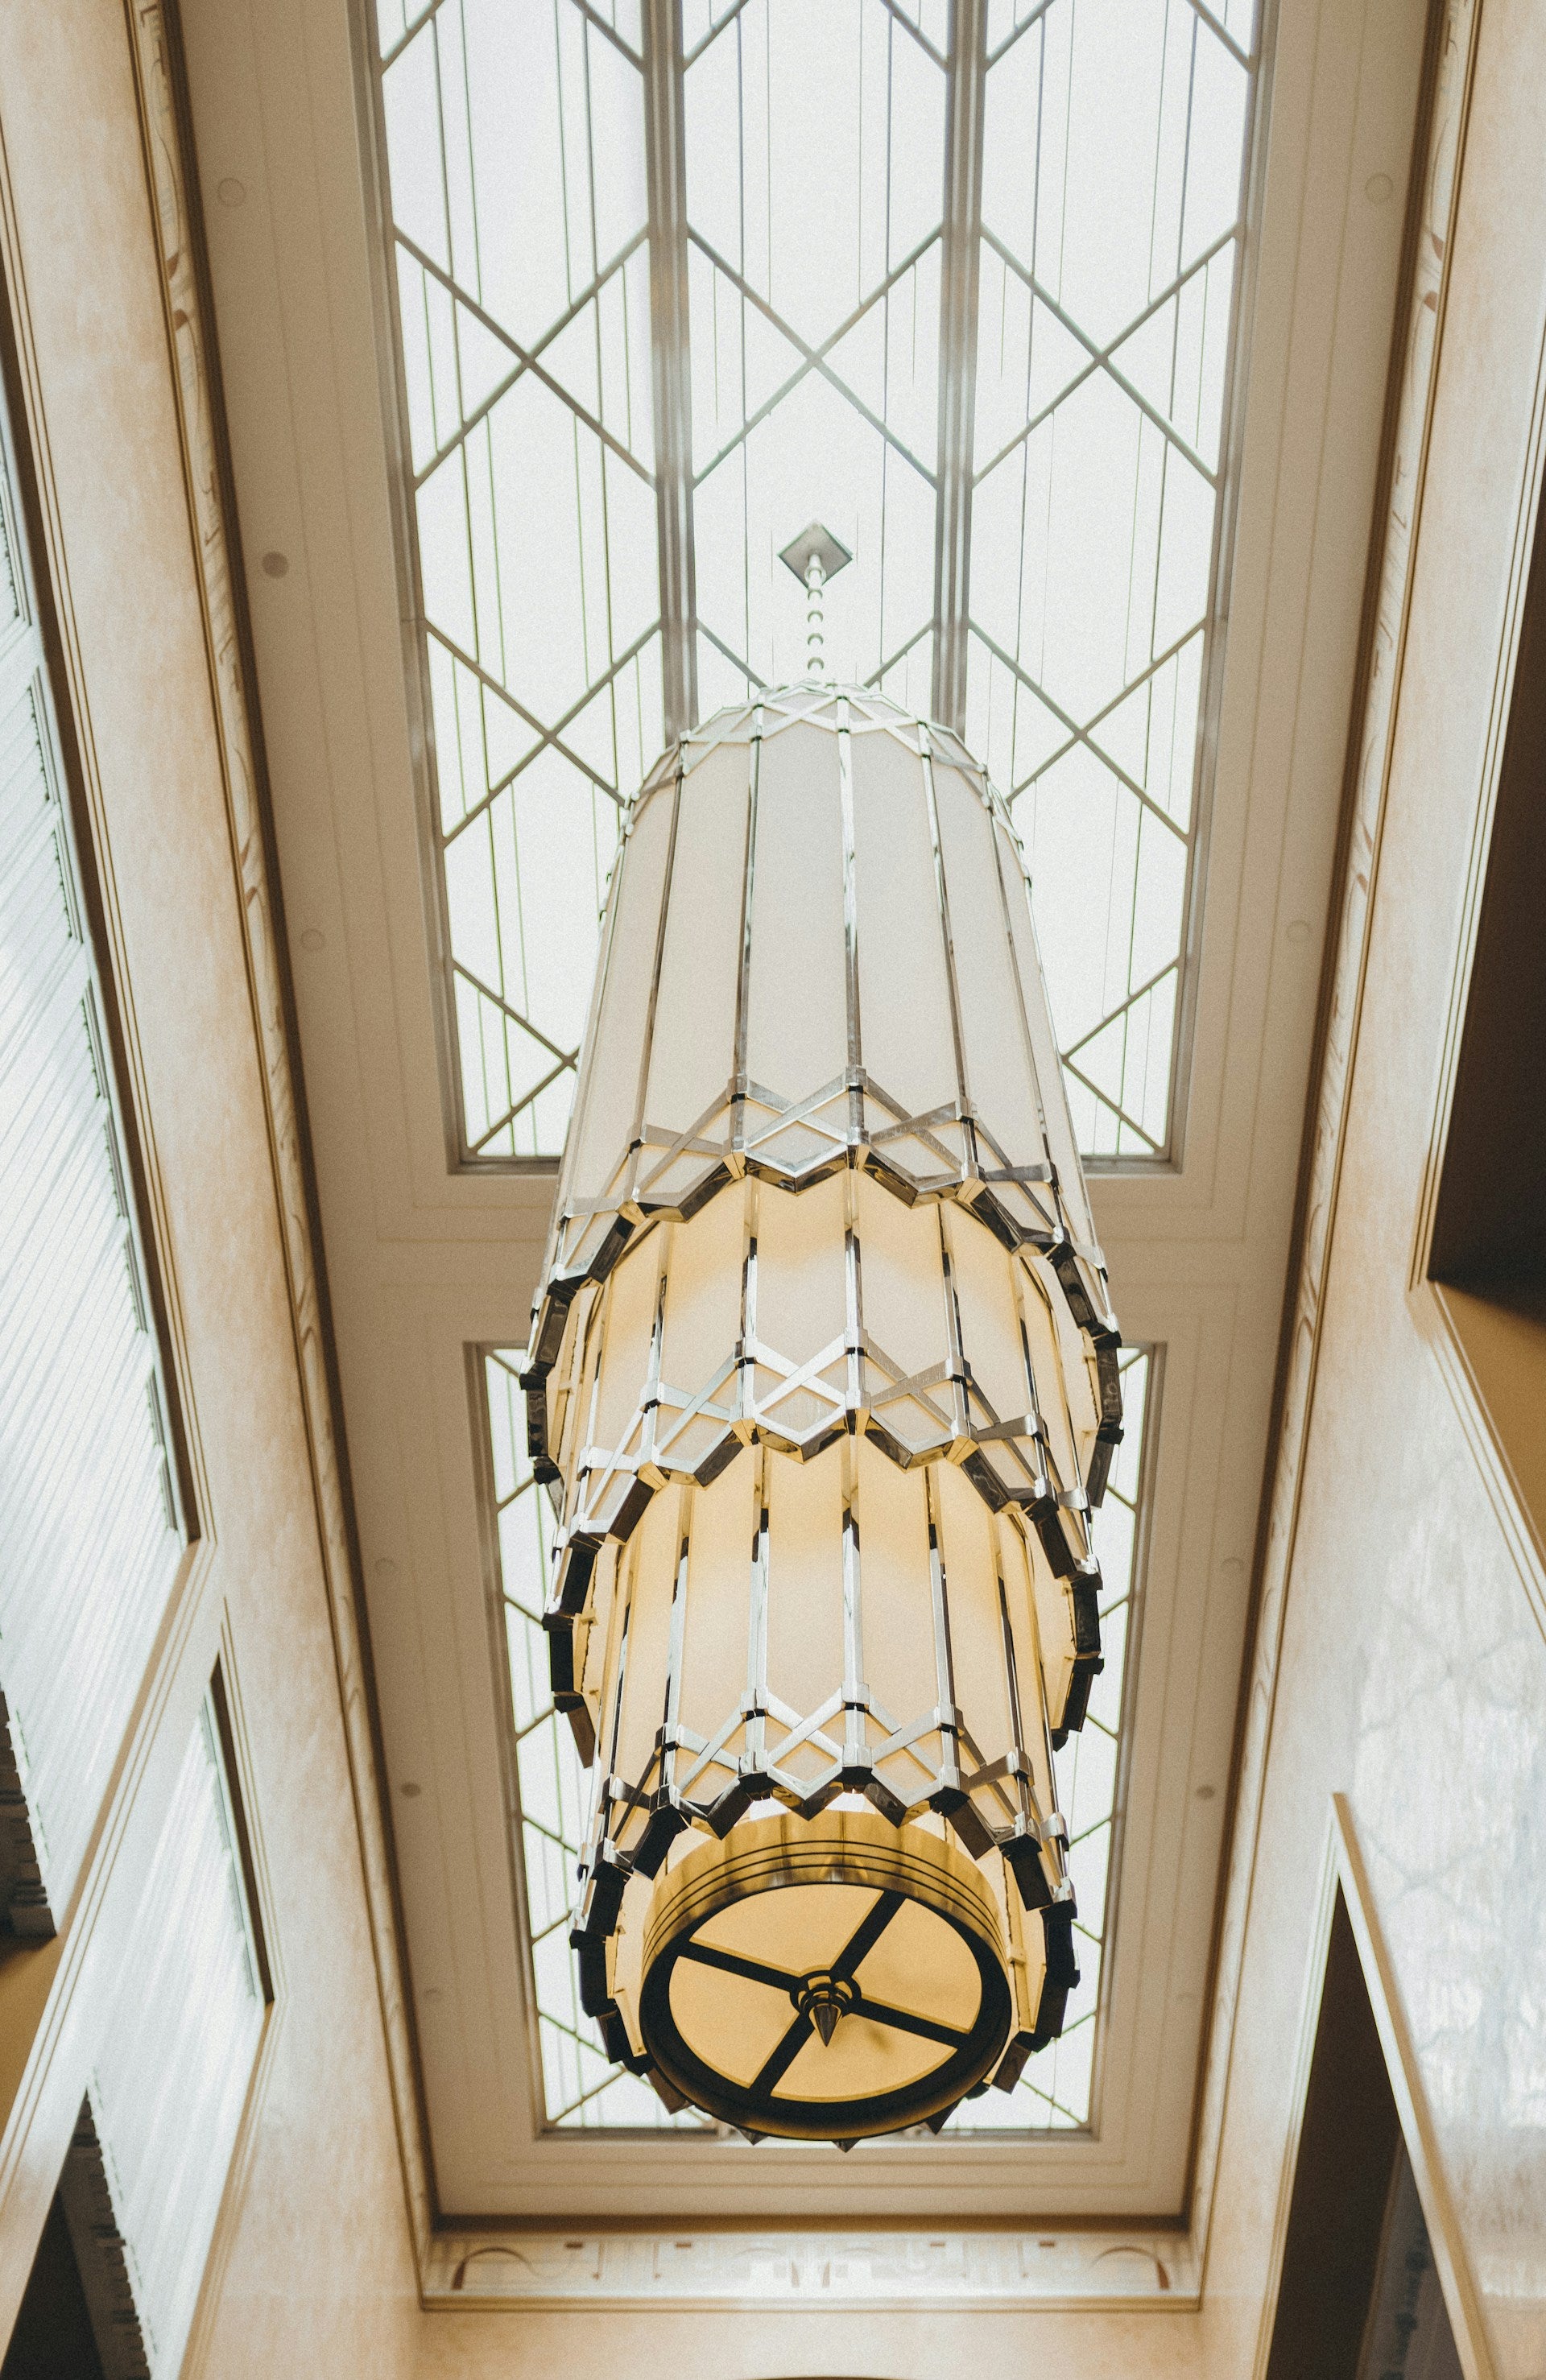 A chandelier hanging from the ceiling in a building.